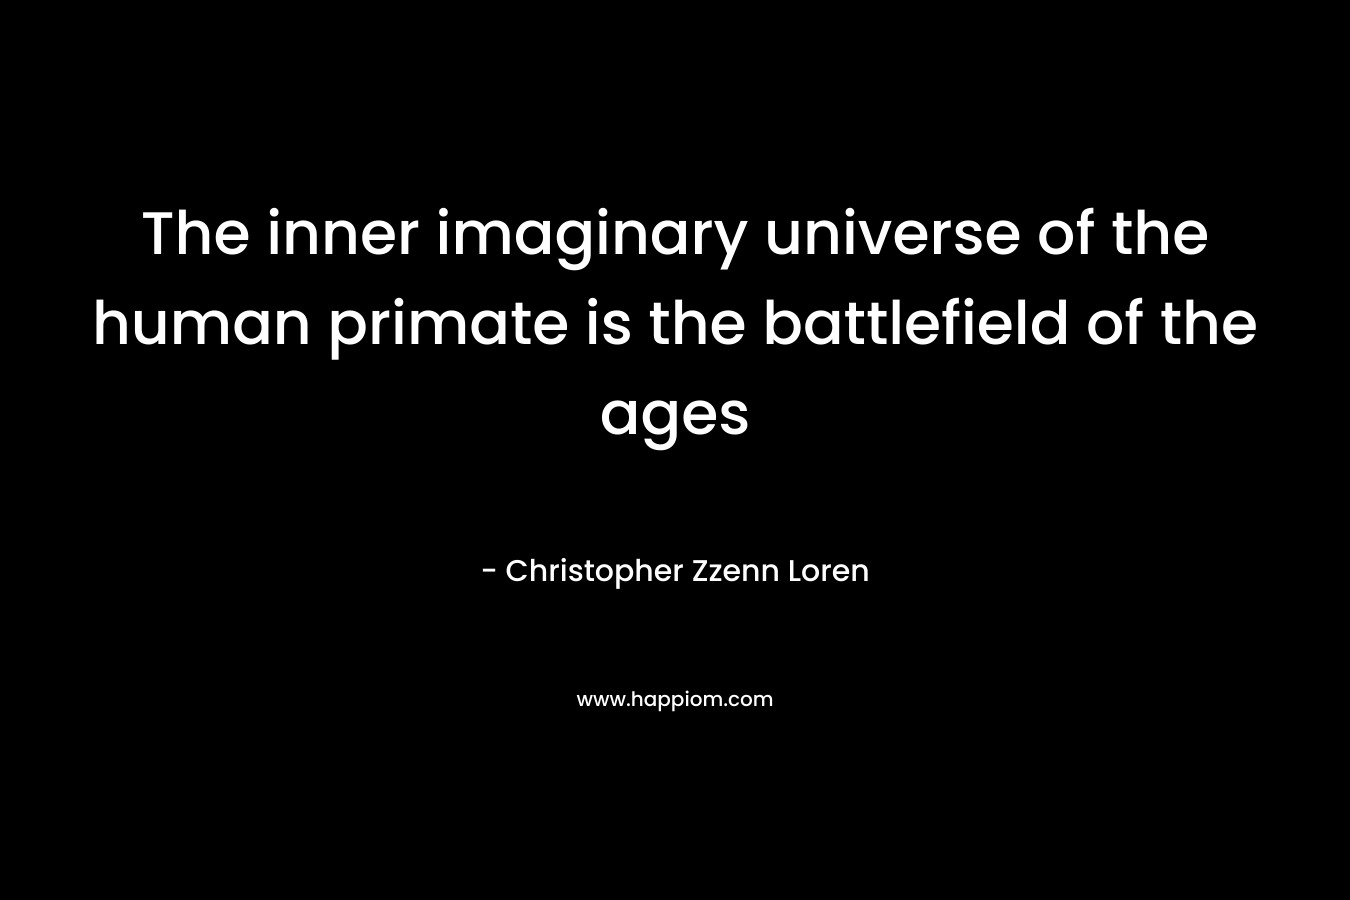 The inner imaginary universe of the human primate is the battlefield of the ages